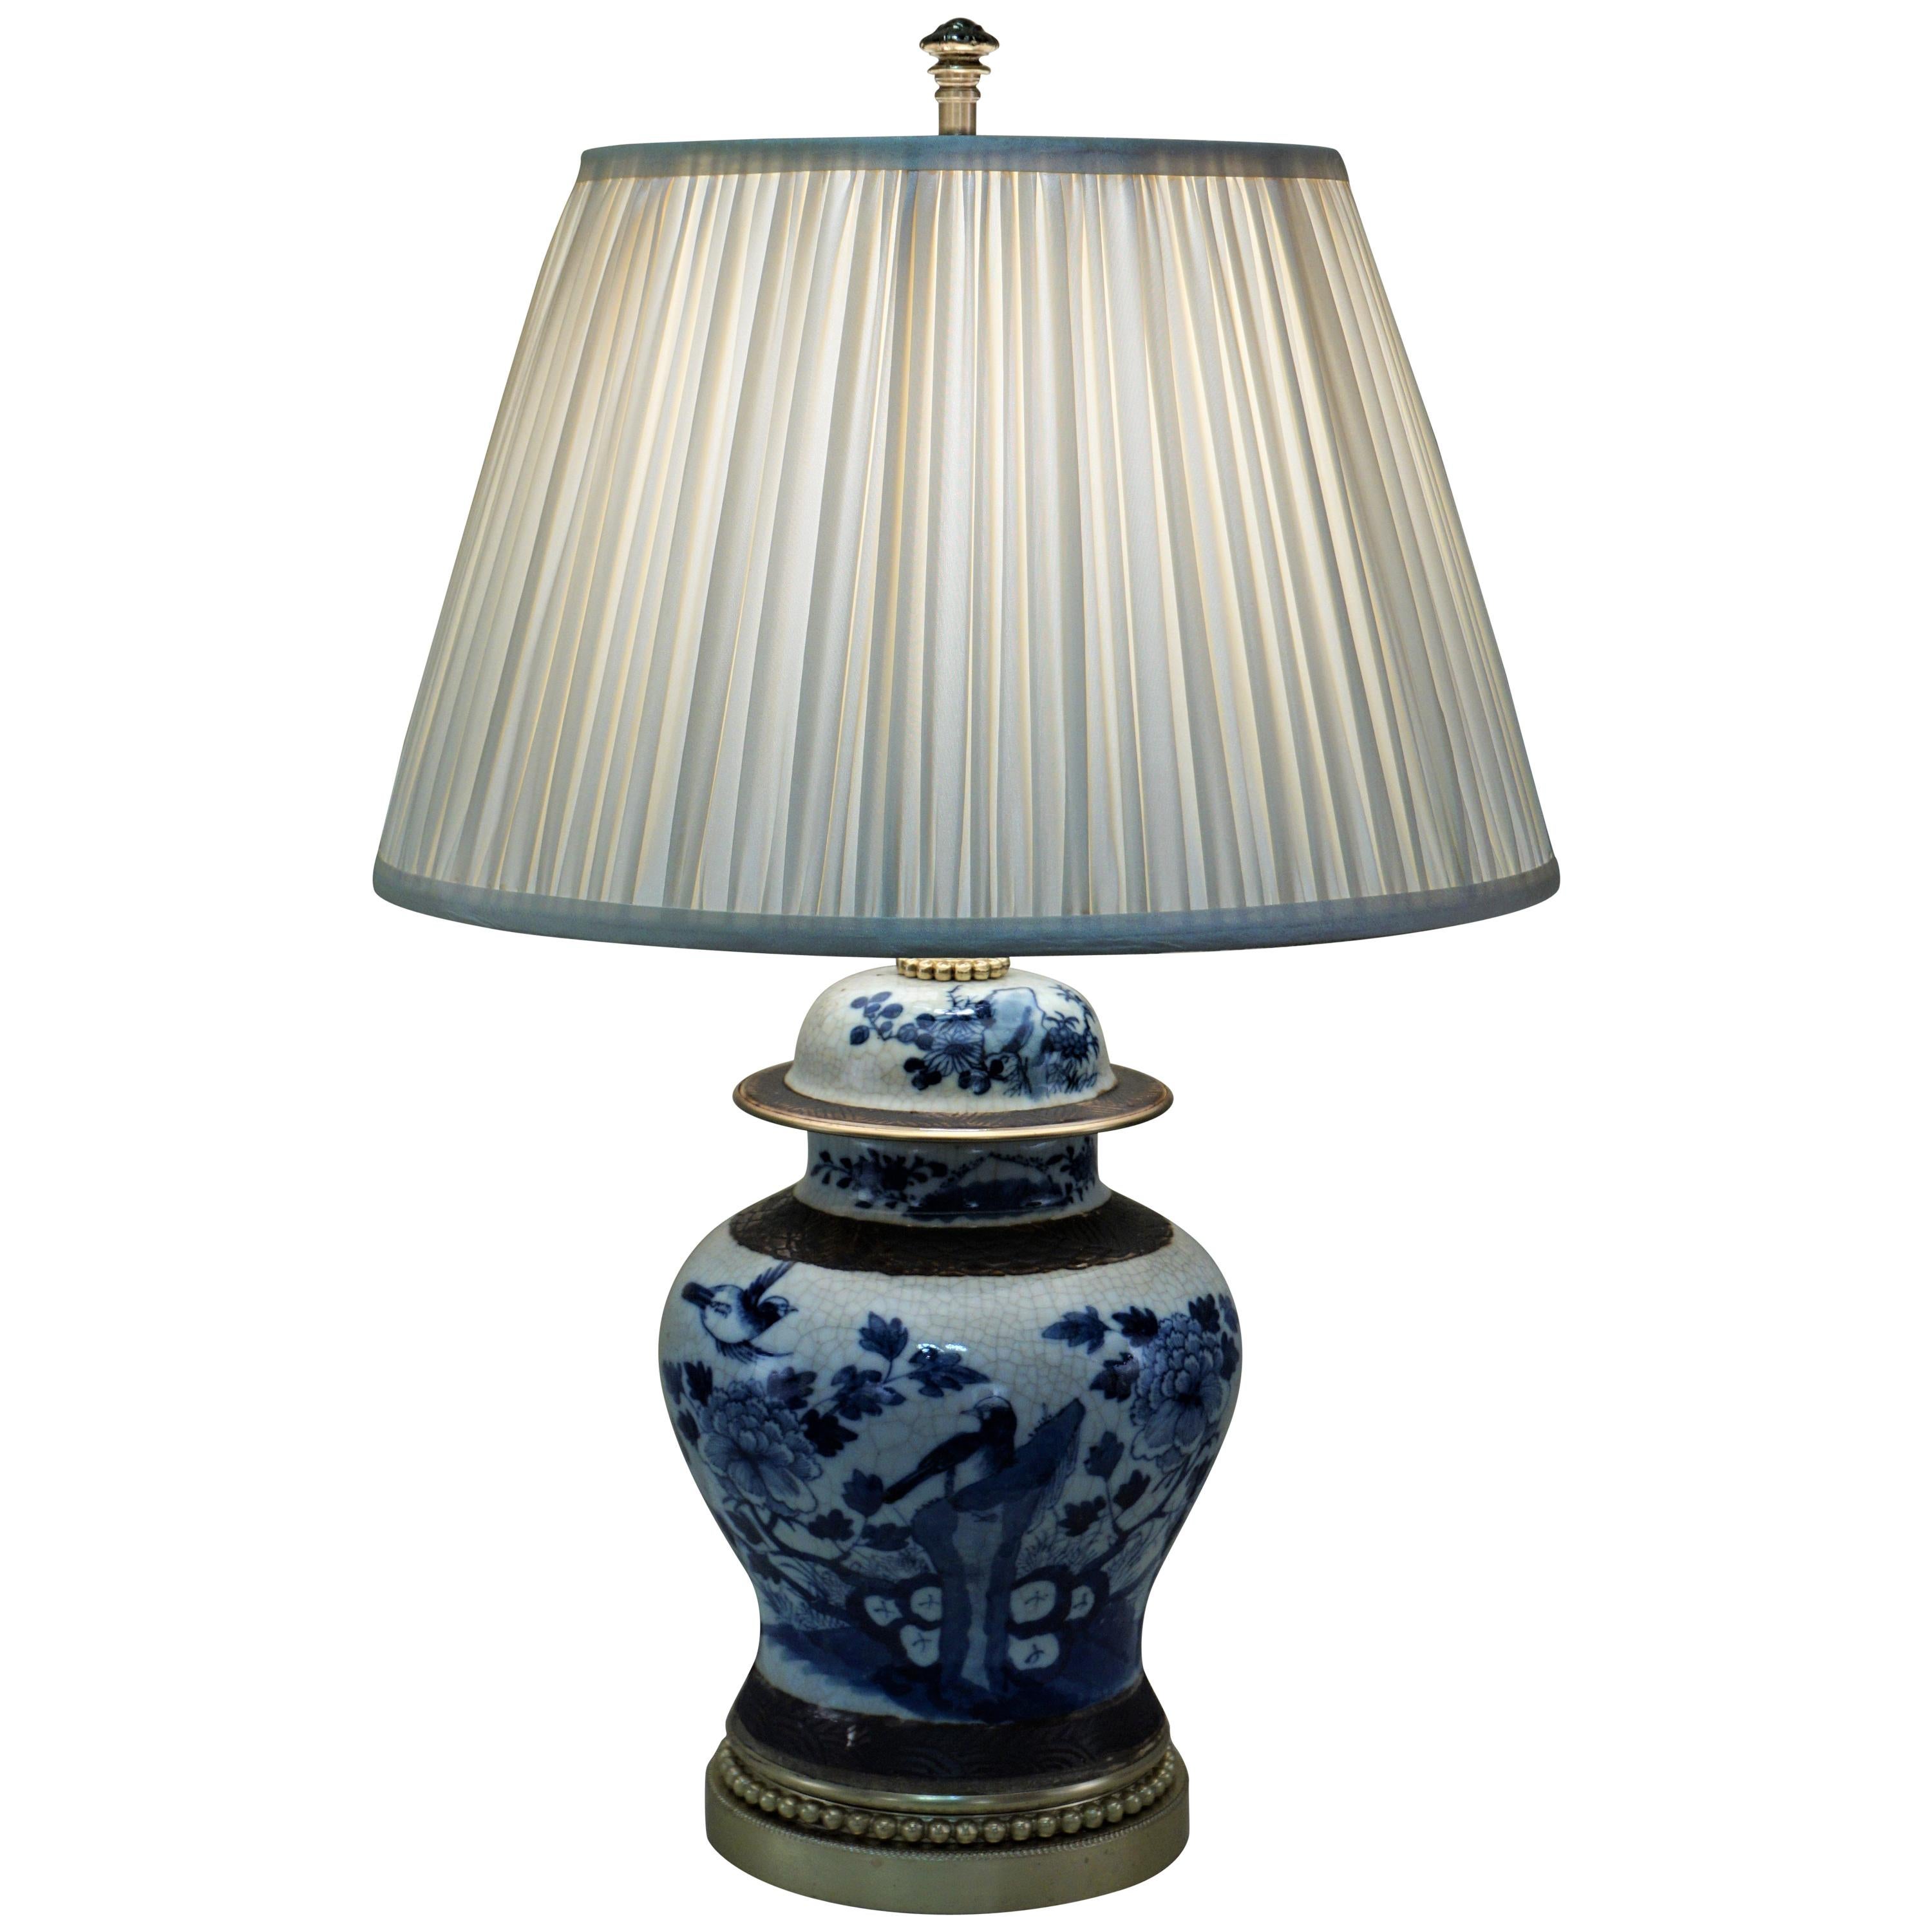 Early 20th Century Chinese Blue and White Porcelain Table Lamp